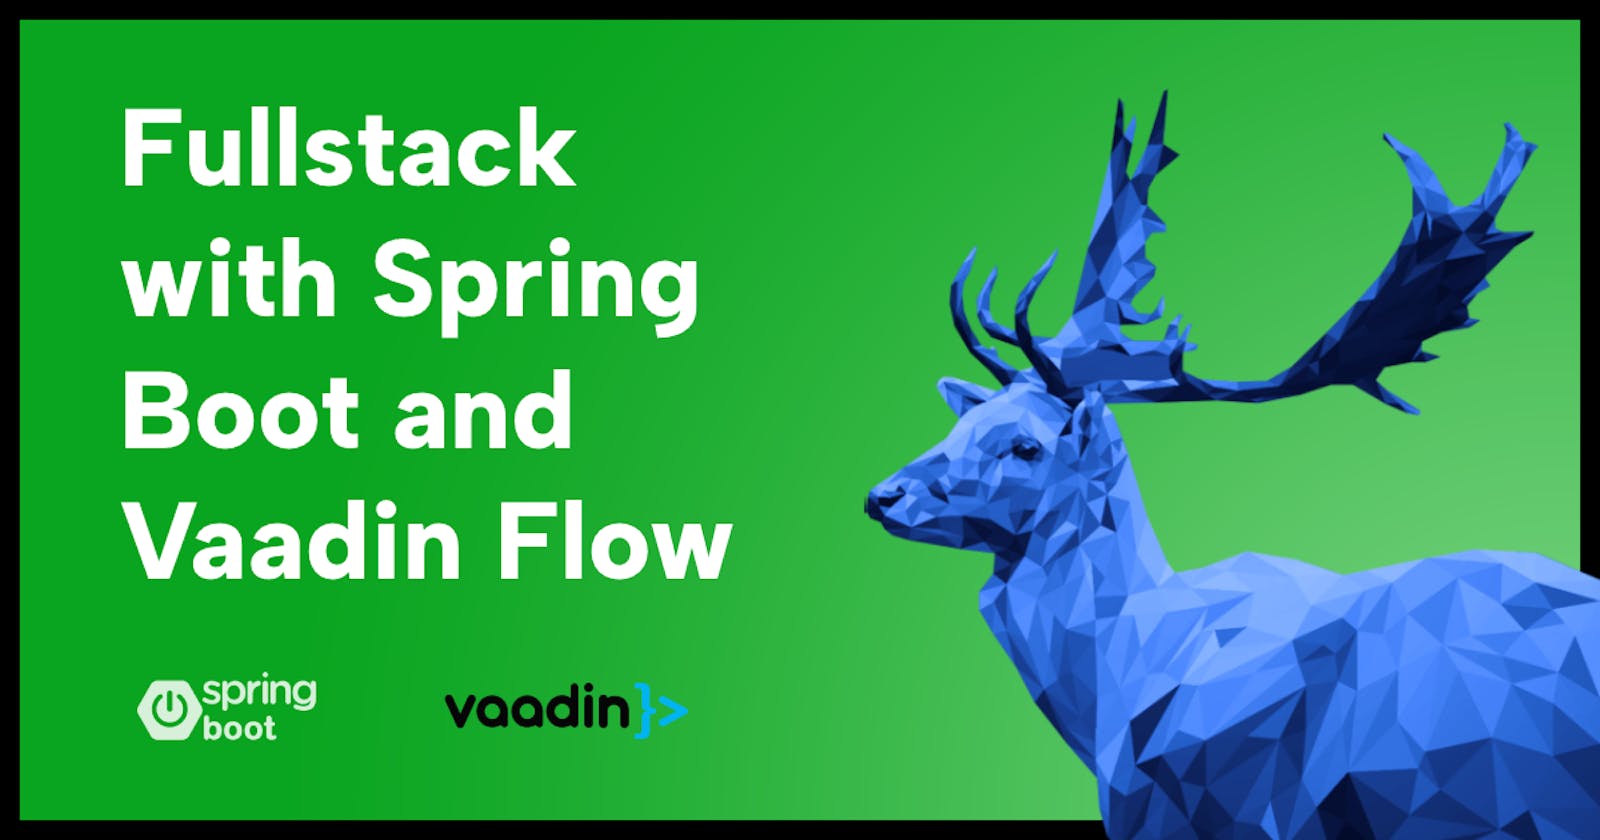 Full stack with Vaadin as a Java developer